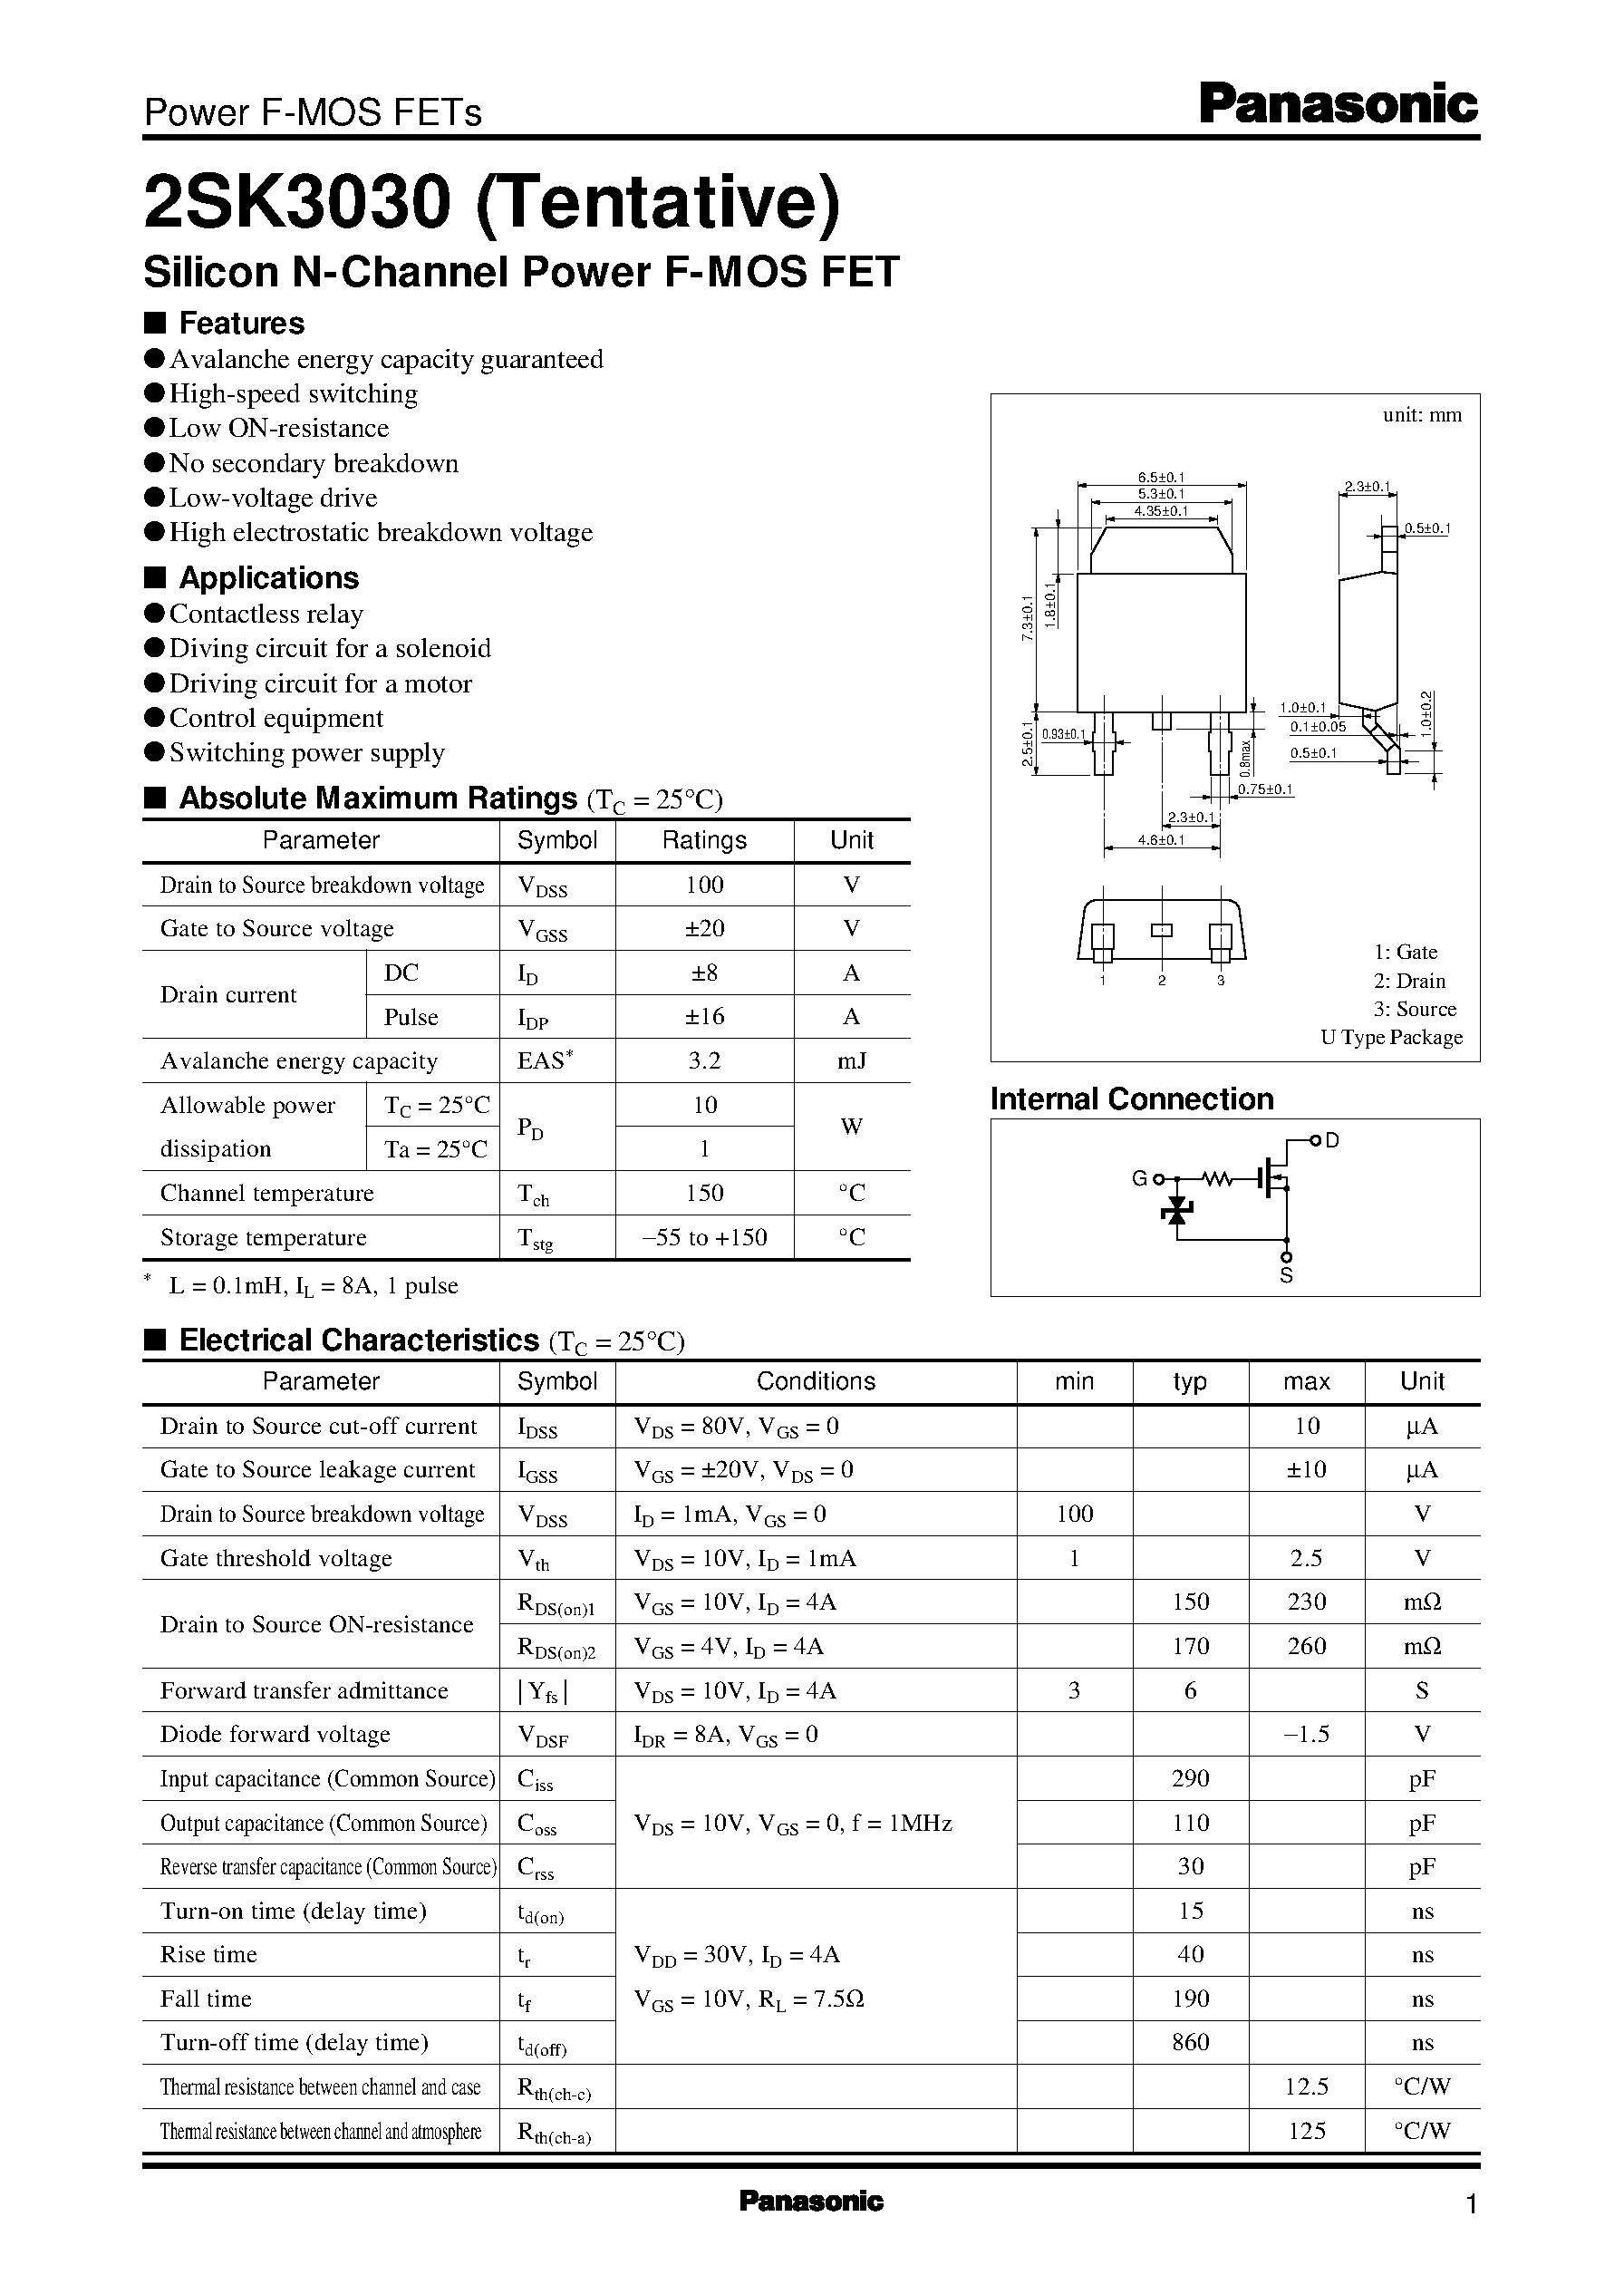 Datasheet 2SK3030 - Silicon N-Channel Power F-MOS FET page 1